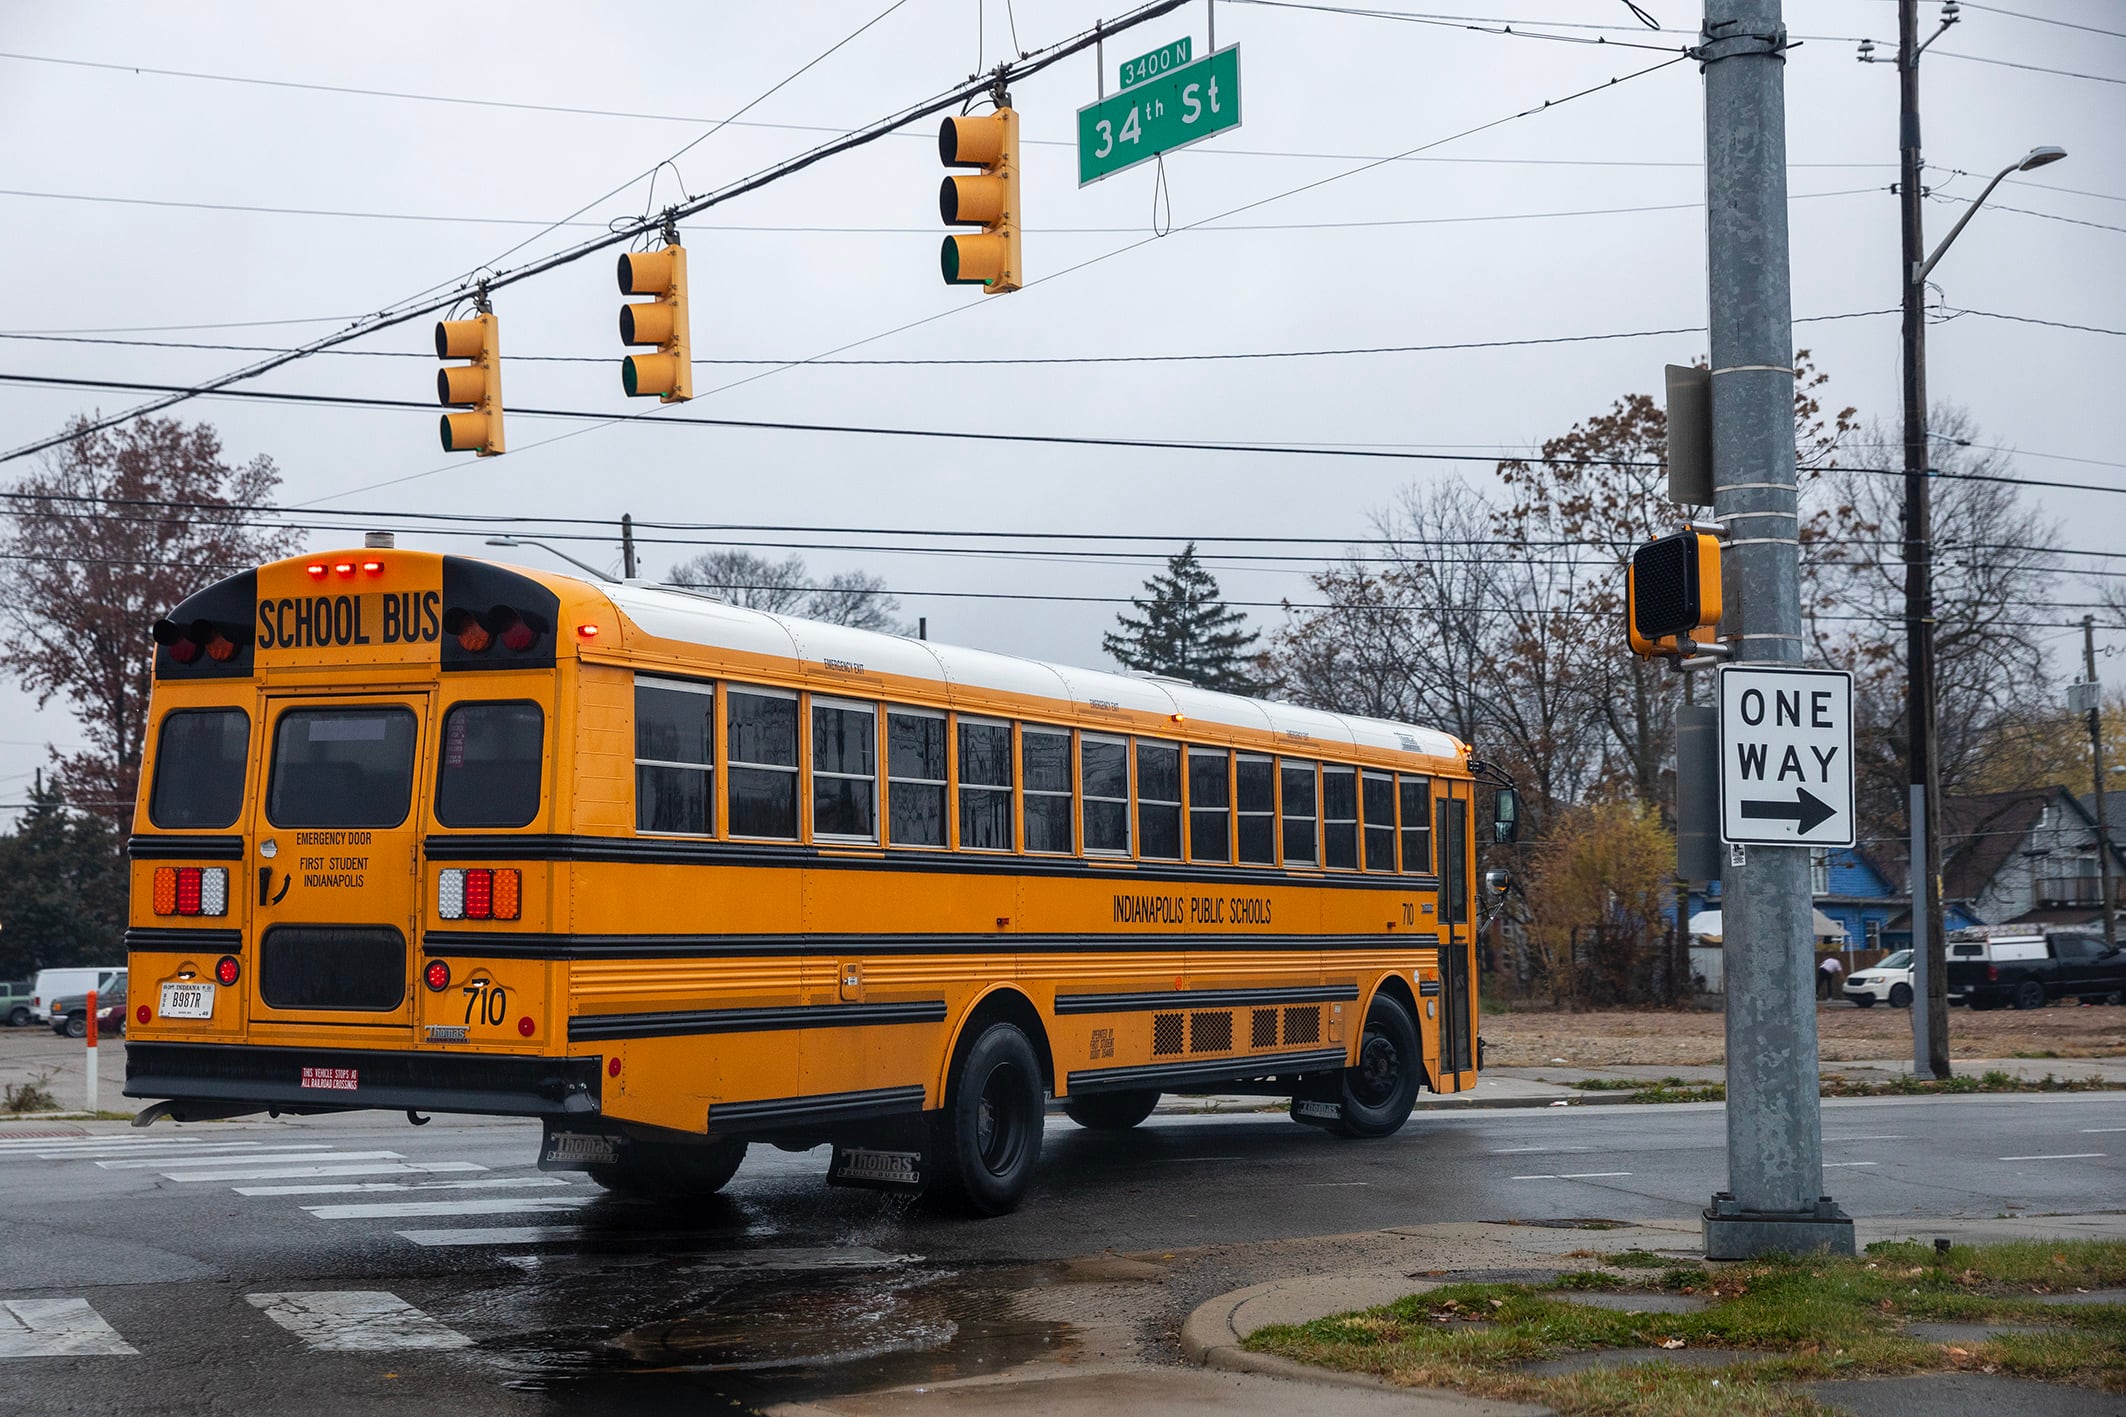 A large yellow and black school bus turns a corner on a street under a street light.